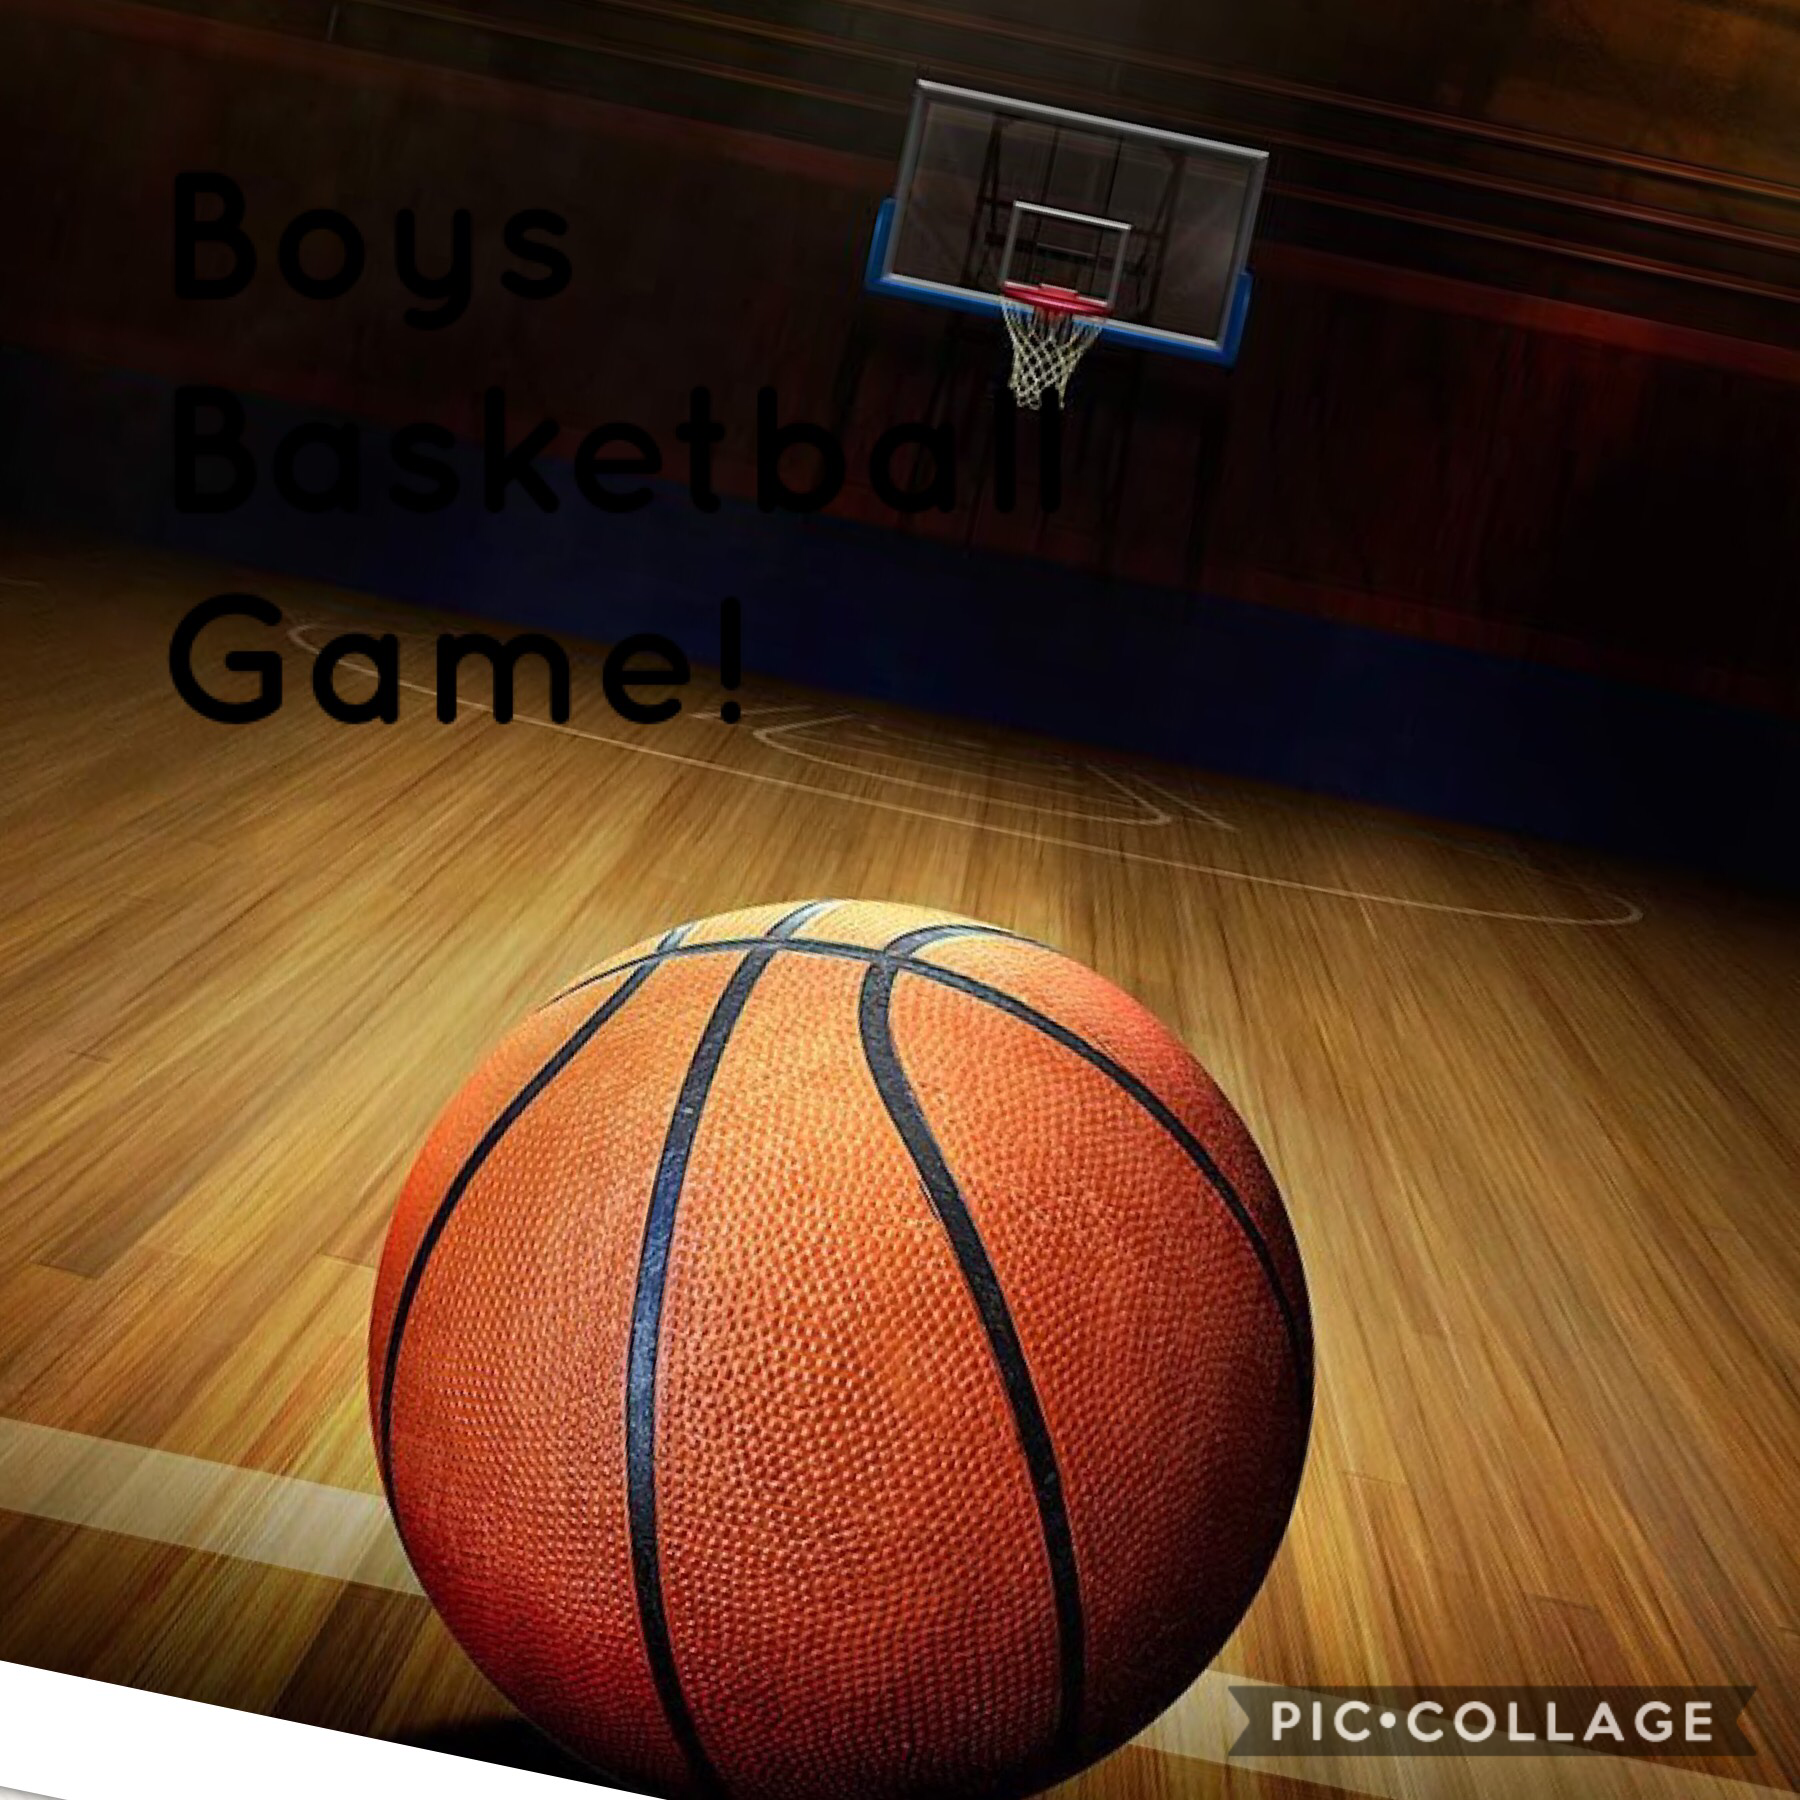 Click the 🏀
The boys played their basketball game tonight! Sadly, they lost. Thy tried their best, and that is all that matters! It was a very fun game! And I can’t wait to cheer for them at their next game!
LET’S GO 🐝 